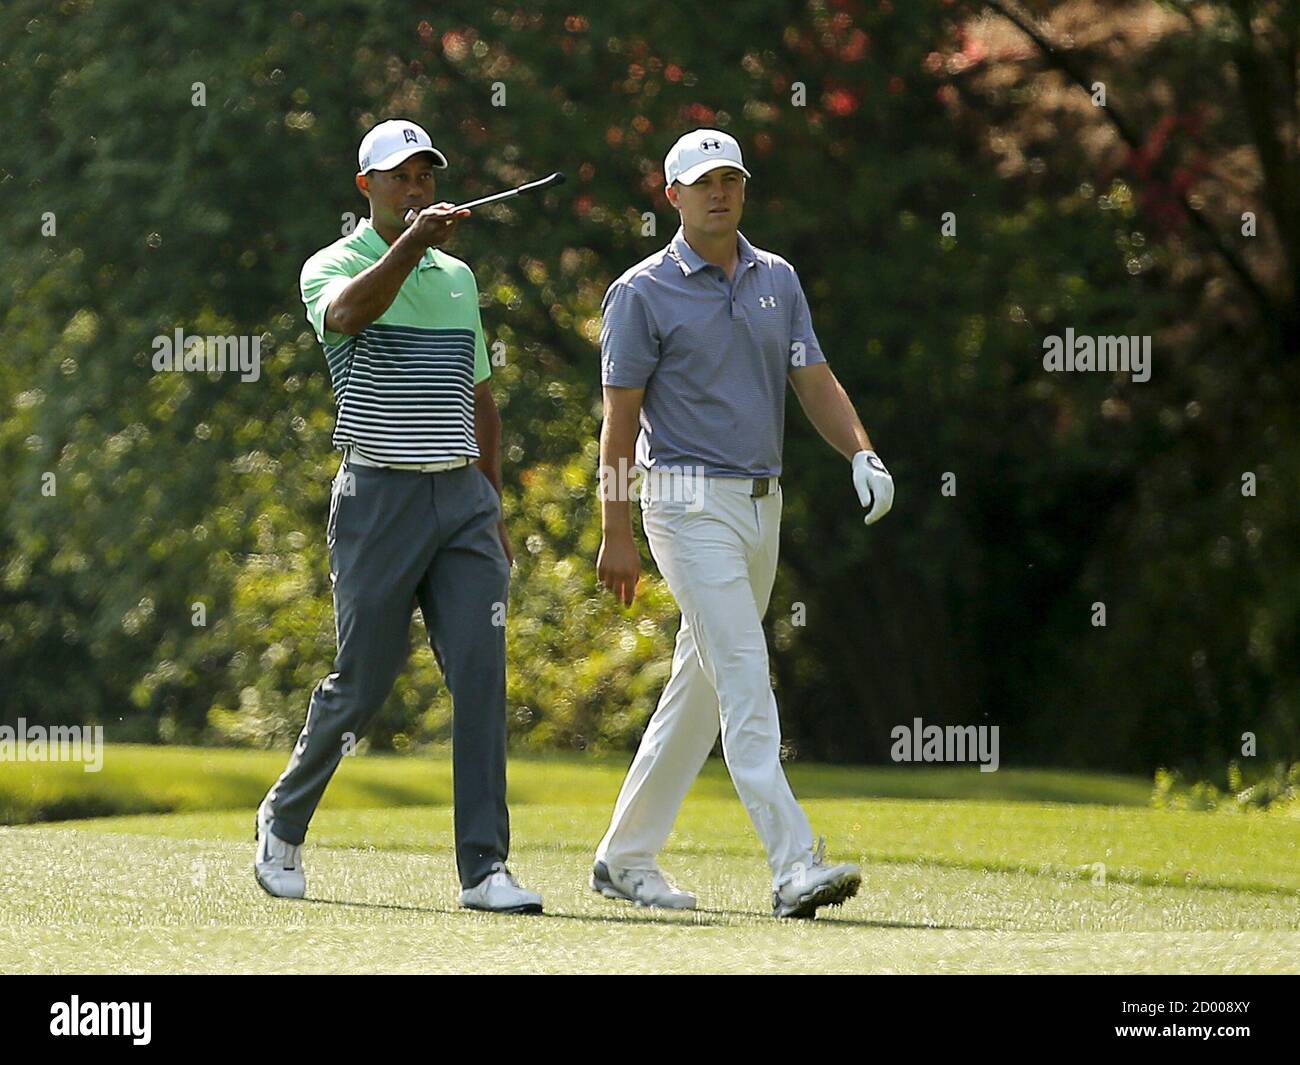 Jordan Spieth (R) gets some pointers from Tiger Woods as they walk up the 13th fairway during a round ahead of the 2015 Masters at Augusta National Golf Course in Augusta, Georgia April 8, 2015. Spieth's sublime putting on some of the most treacherous greens in golf, which set up his Masters victory on Sunday, was underpinned by his imaginative touch, says putting maestro Ben Crenshaw. Picture taken April 8, 2015. REUTERS/Brian Snyder Stock Photo